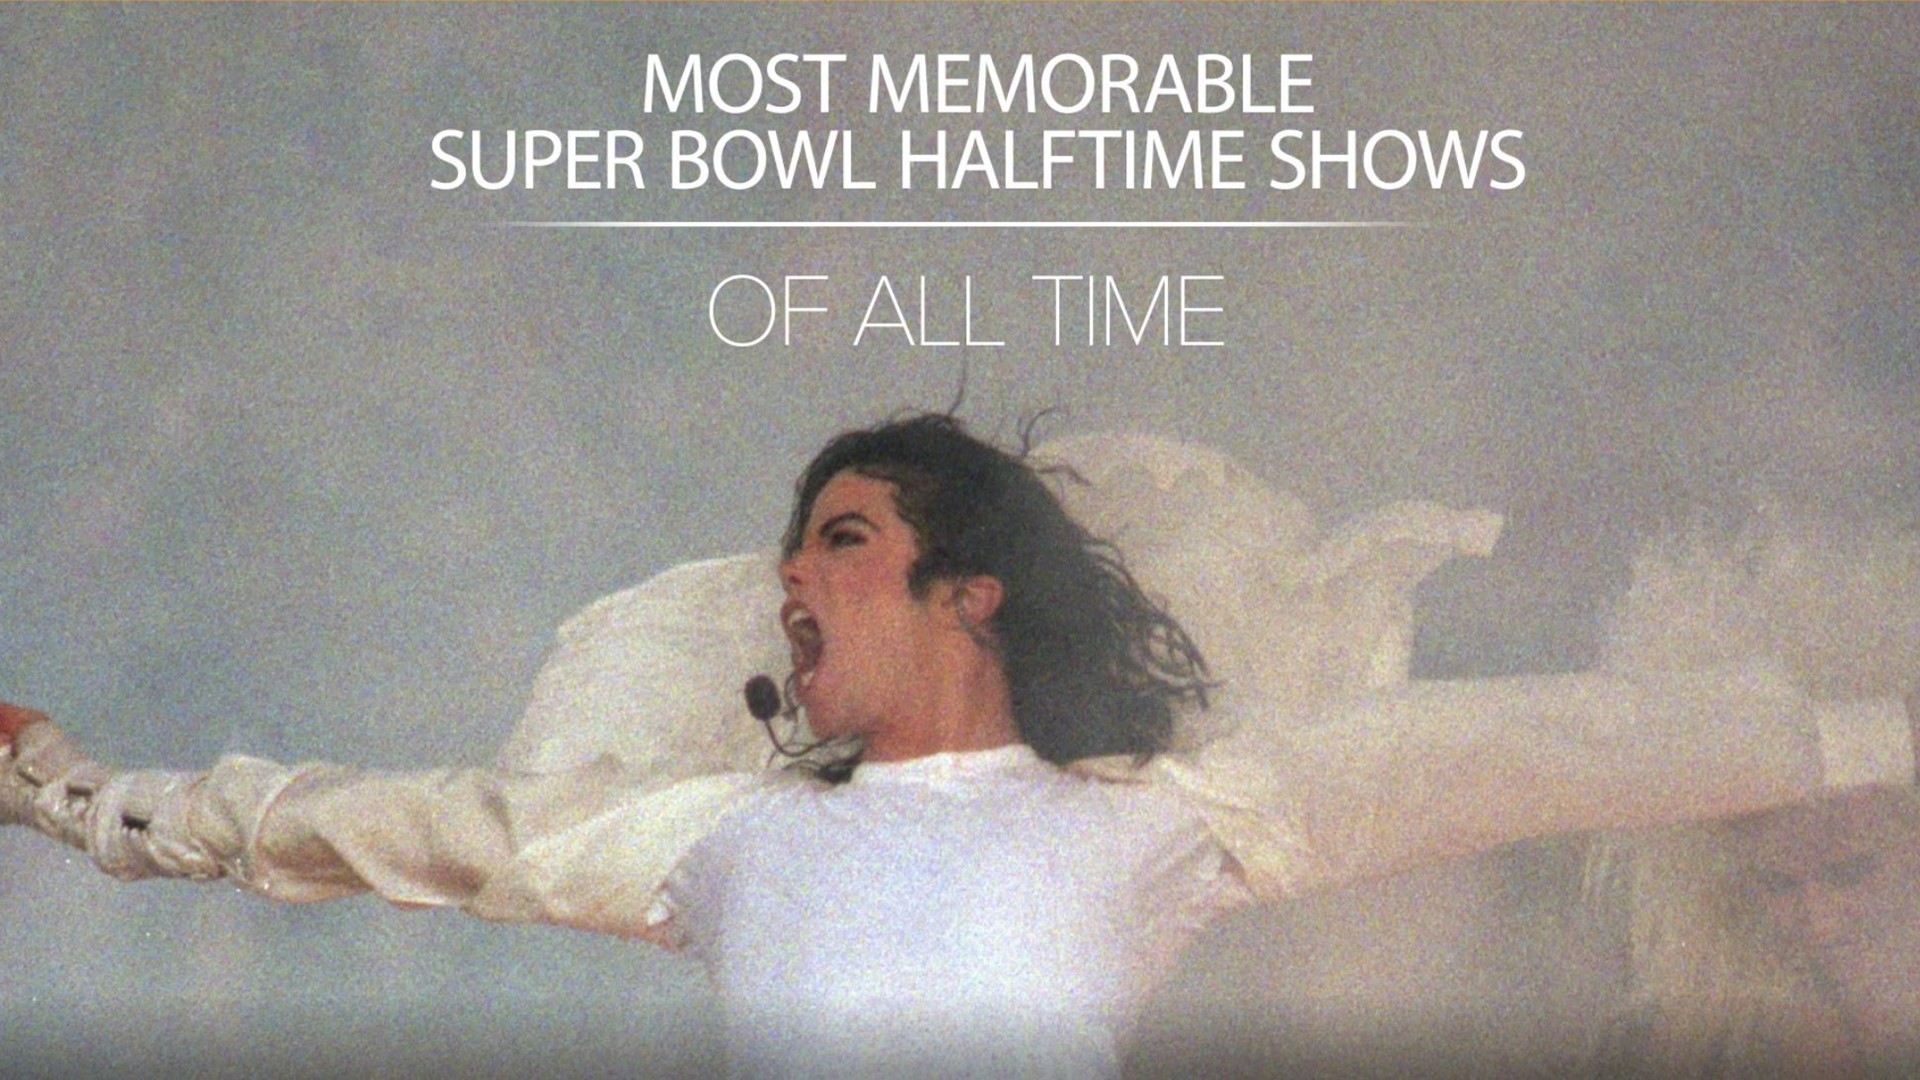 Here are five Super Bowl halftime shows we'll never forget.